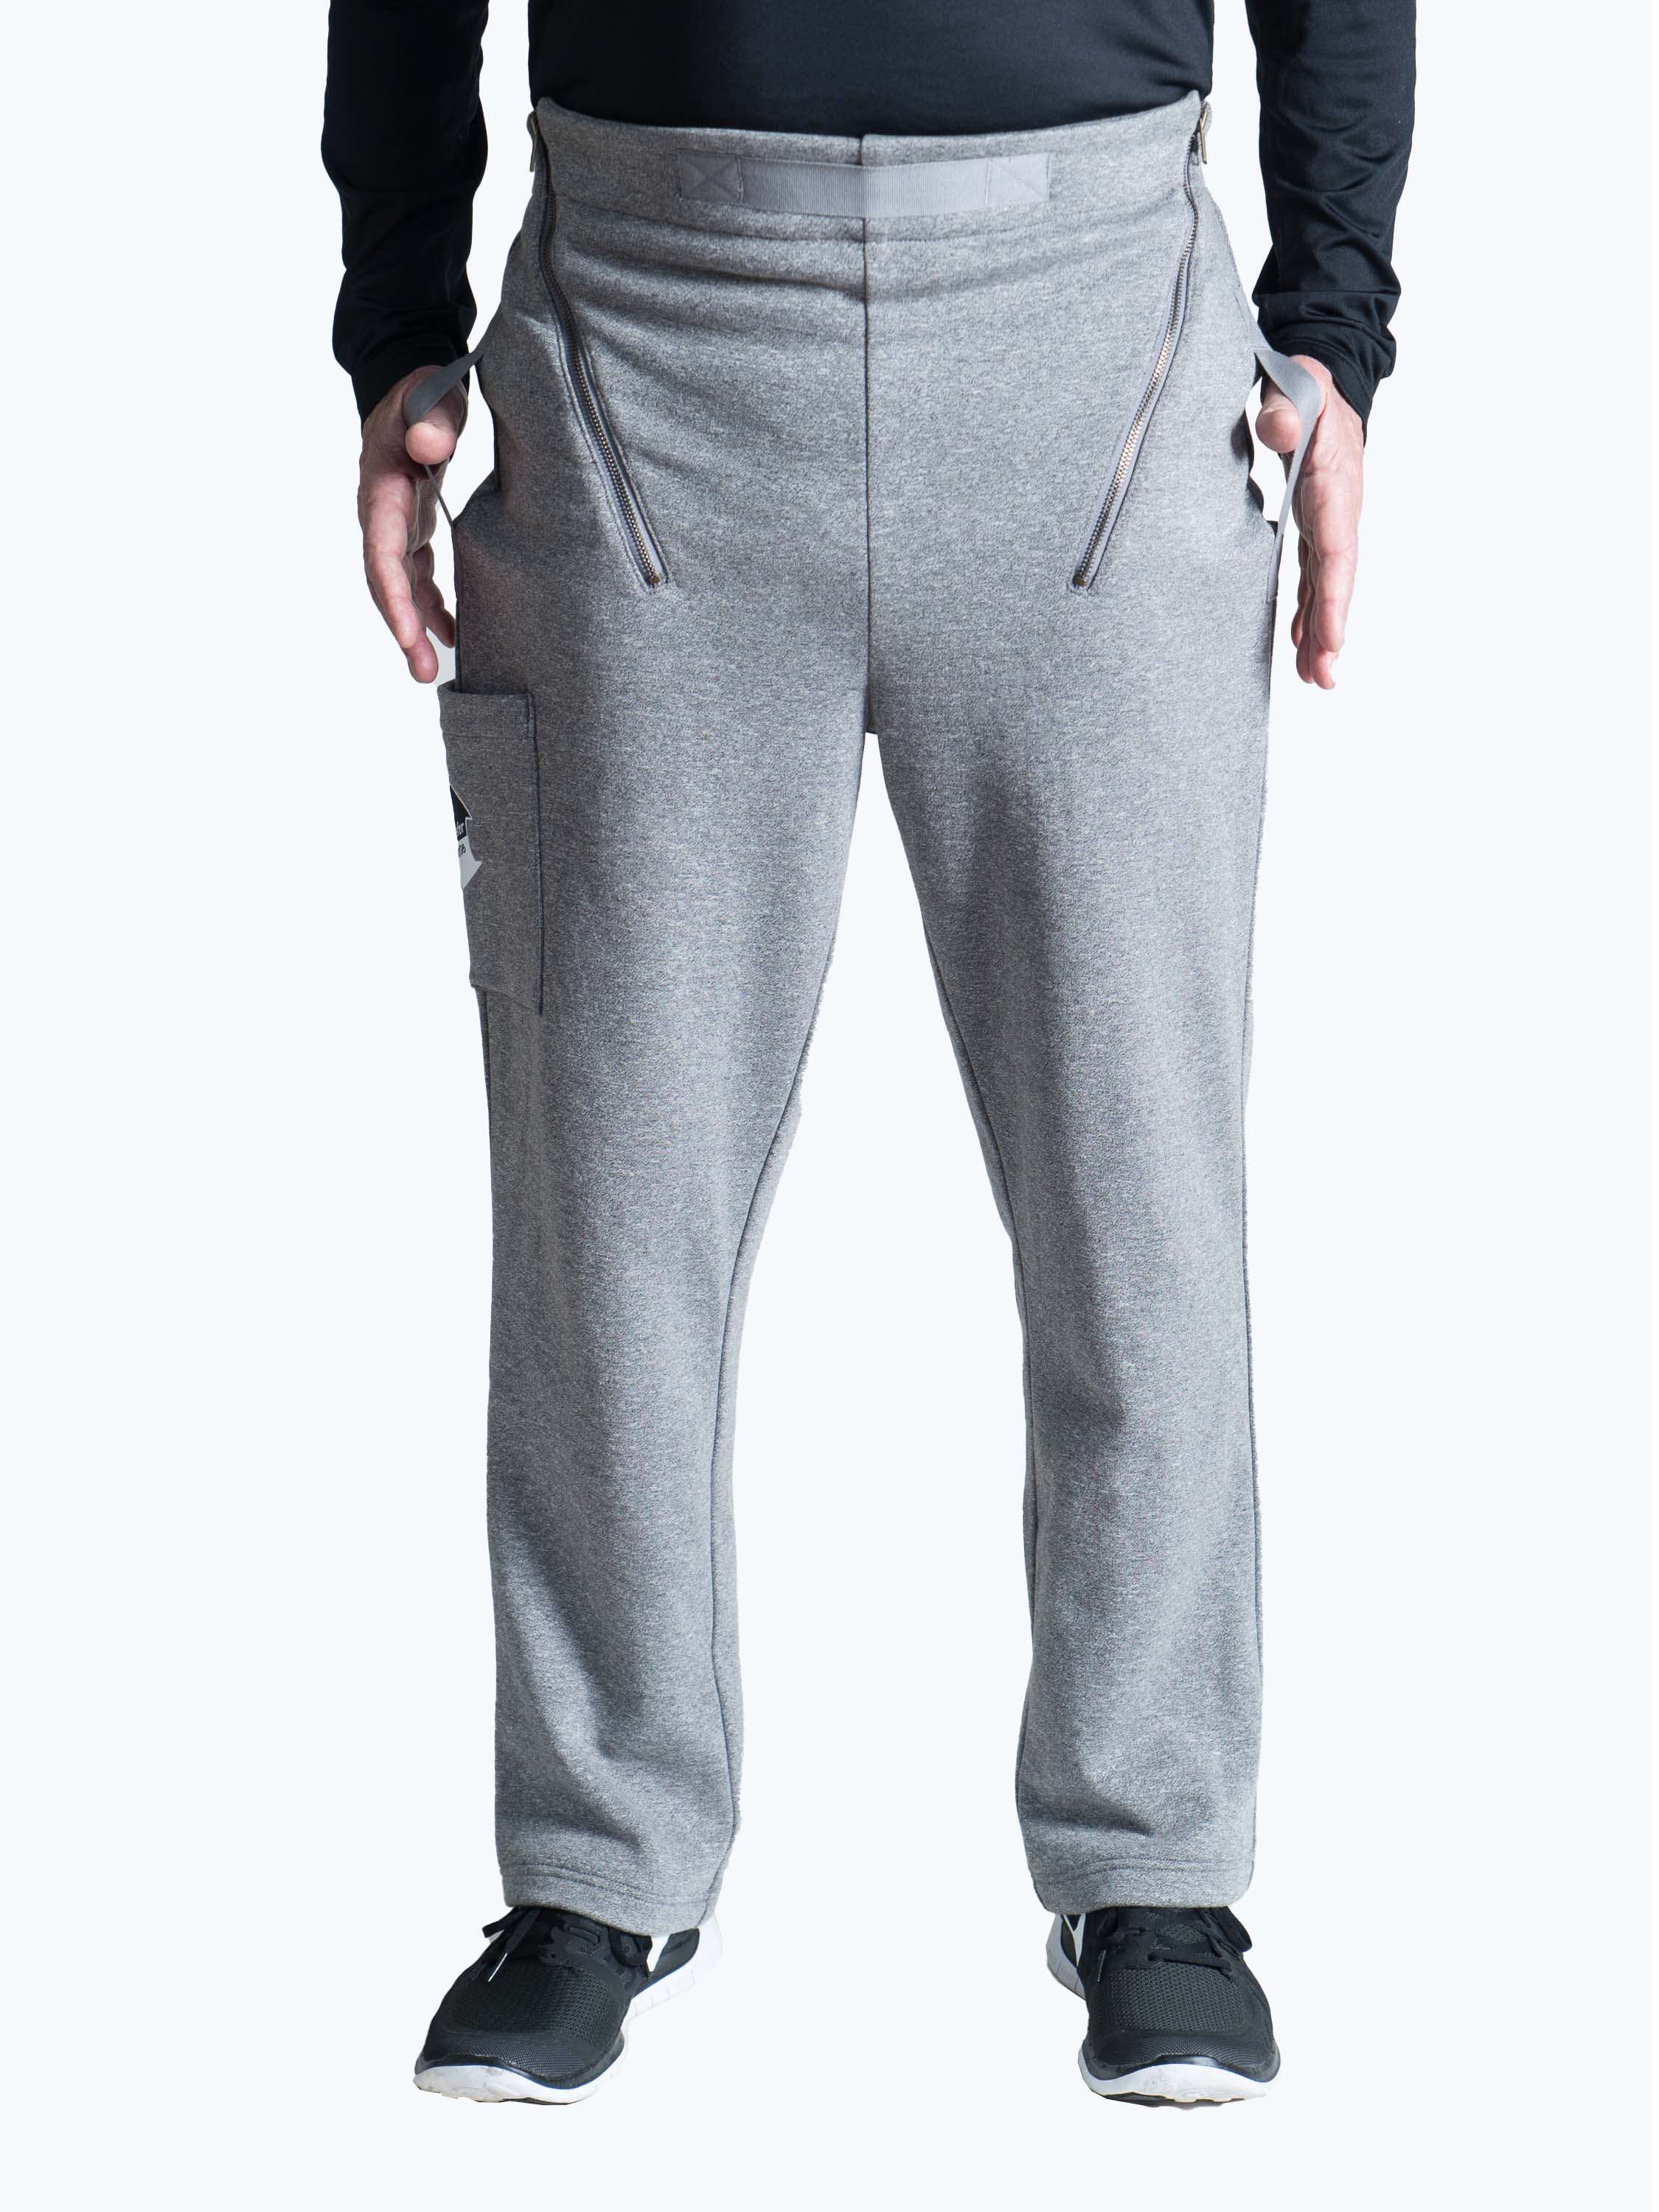 Transfer Pants Comfy Fleece Sweatpants (For Disabled and Wheelchair  Patients)